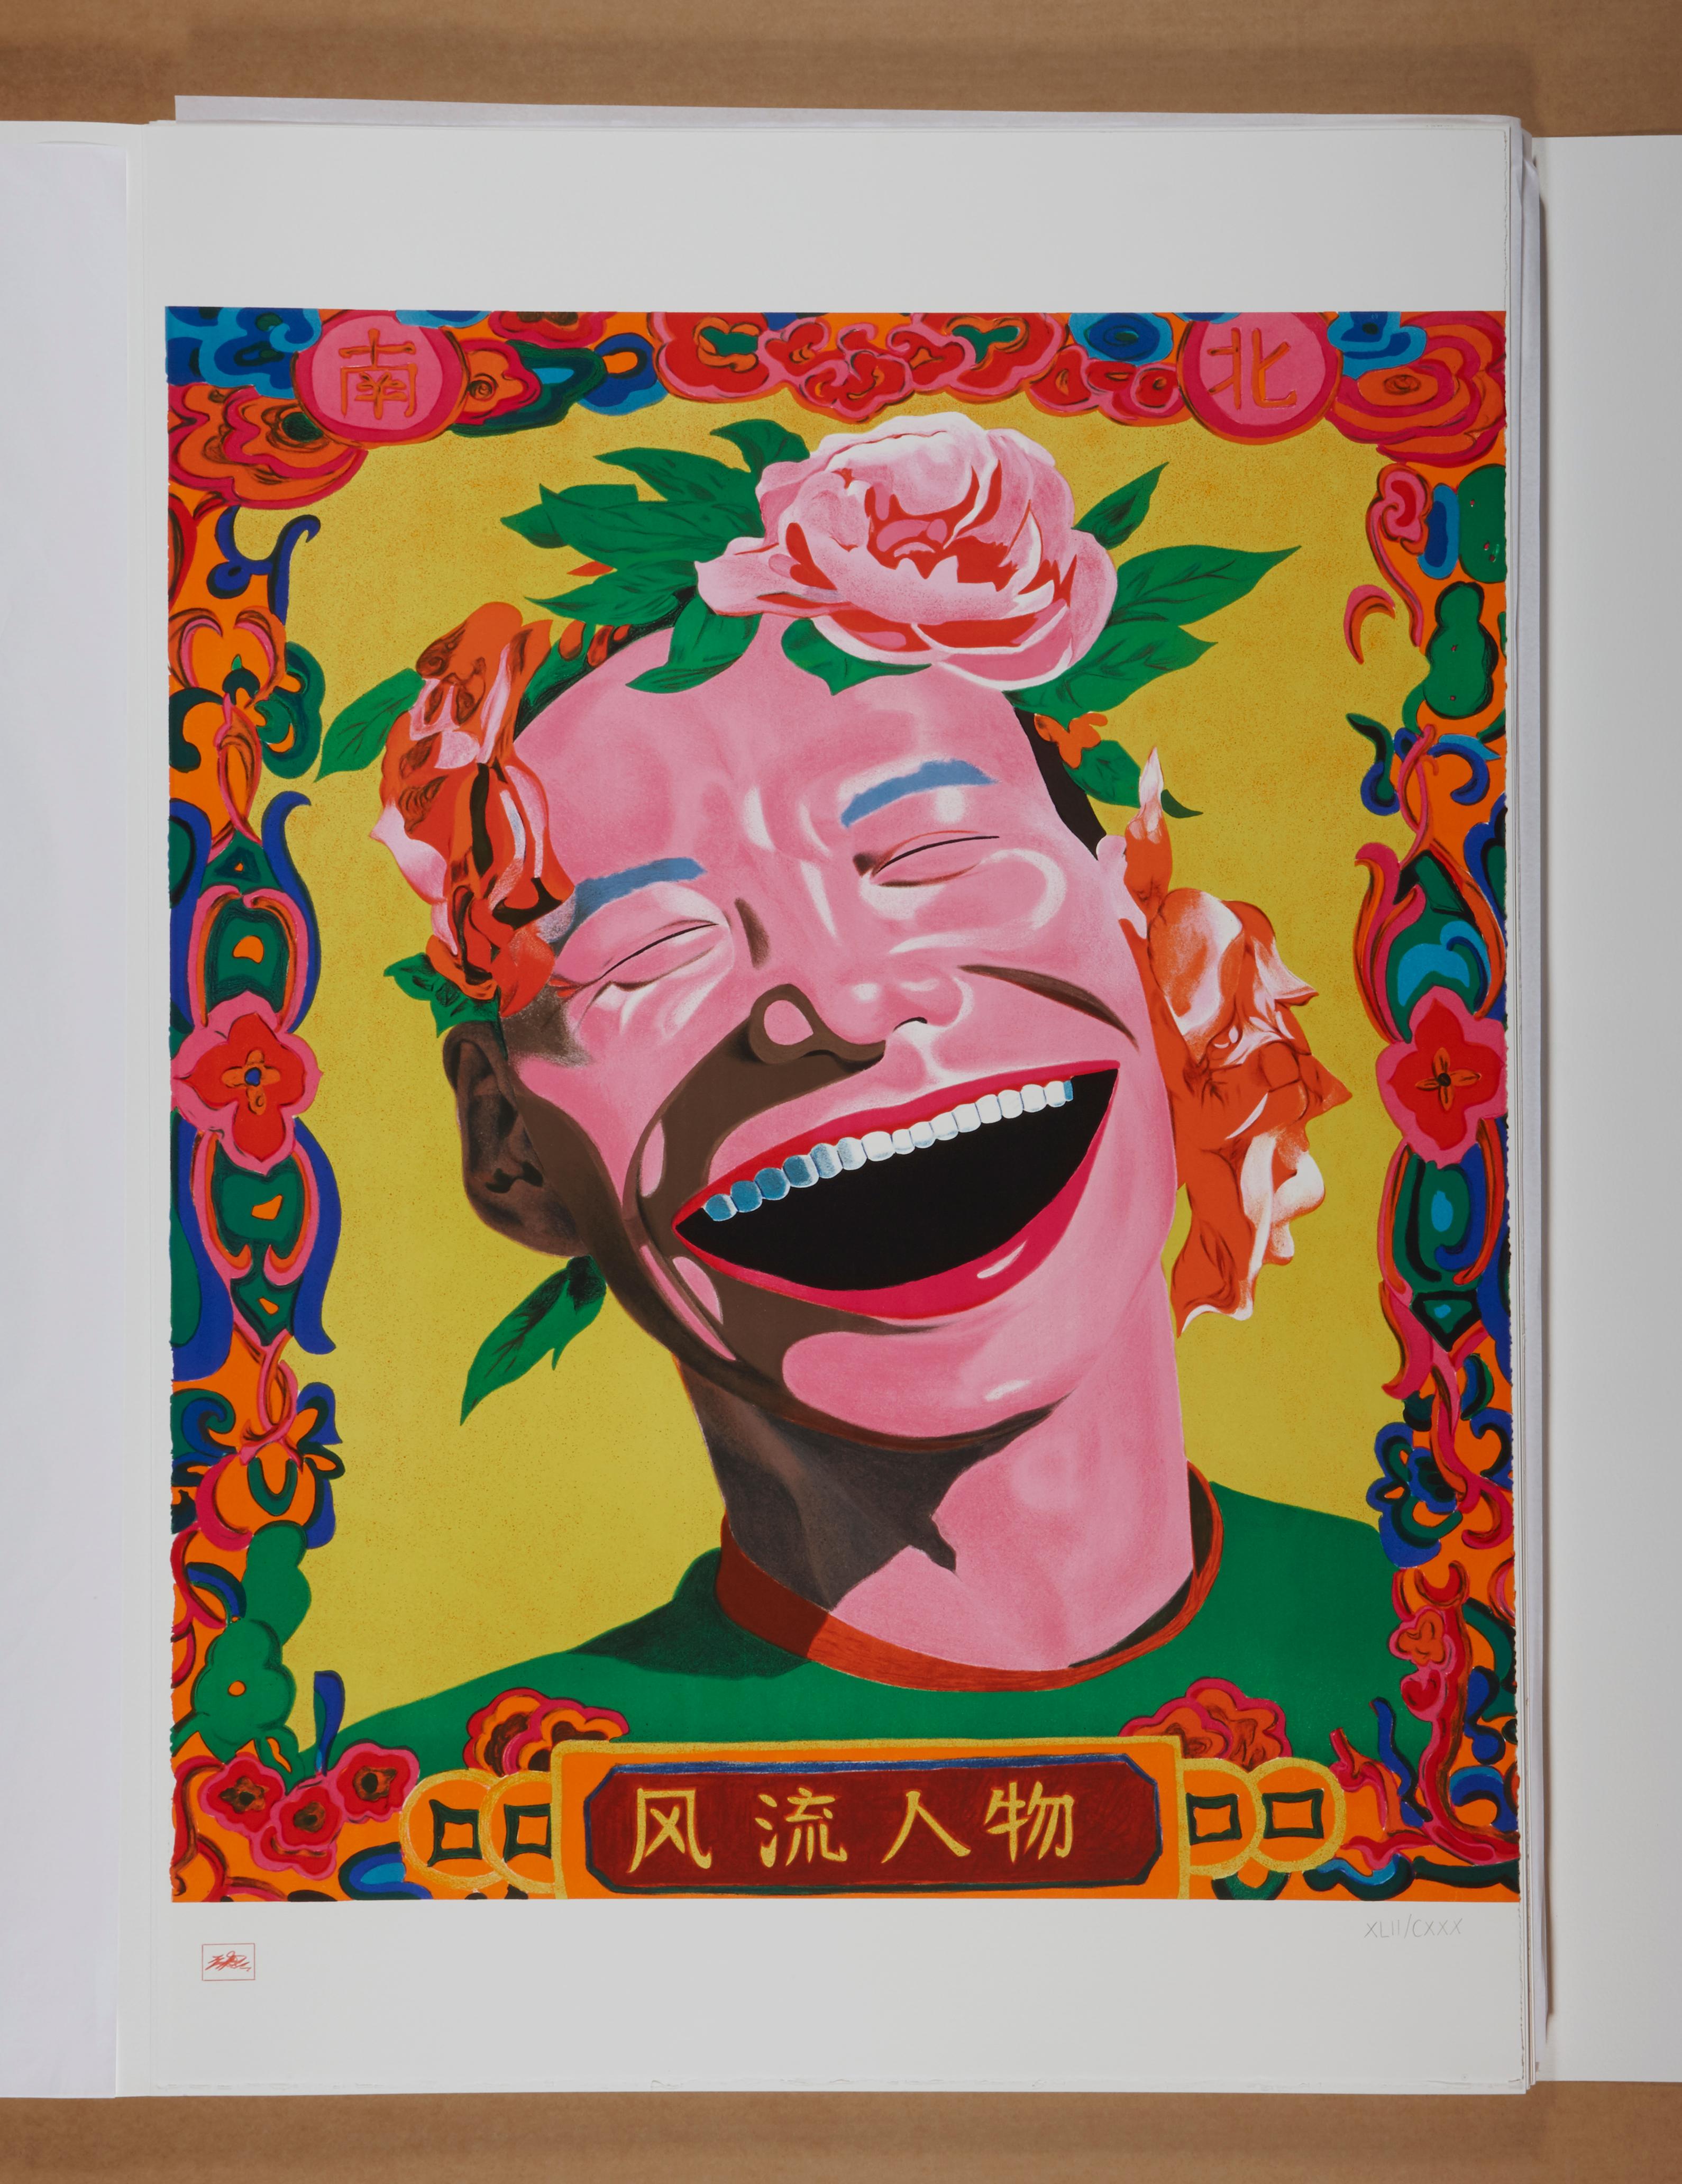 Yue Minjun, Remarkable People
Contemporary, 21st Century, Lithograph, Limited Edition, Chinese
Lithograph
Edition of 130
80 × 120 cm (47 1/5 × 31 1/2 in)
Stamped Signature, numbered in Roman numerals
In mint condition, as acquired from the